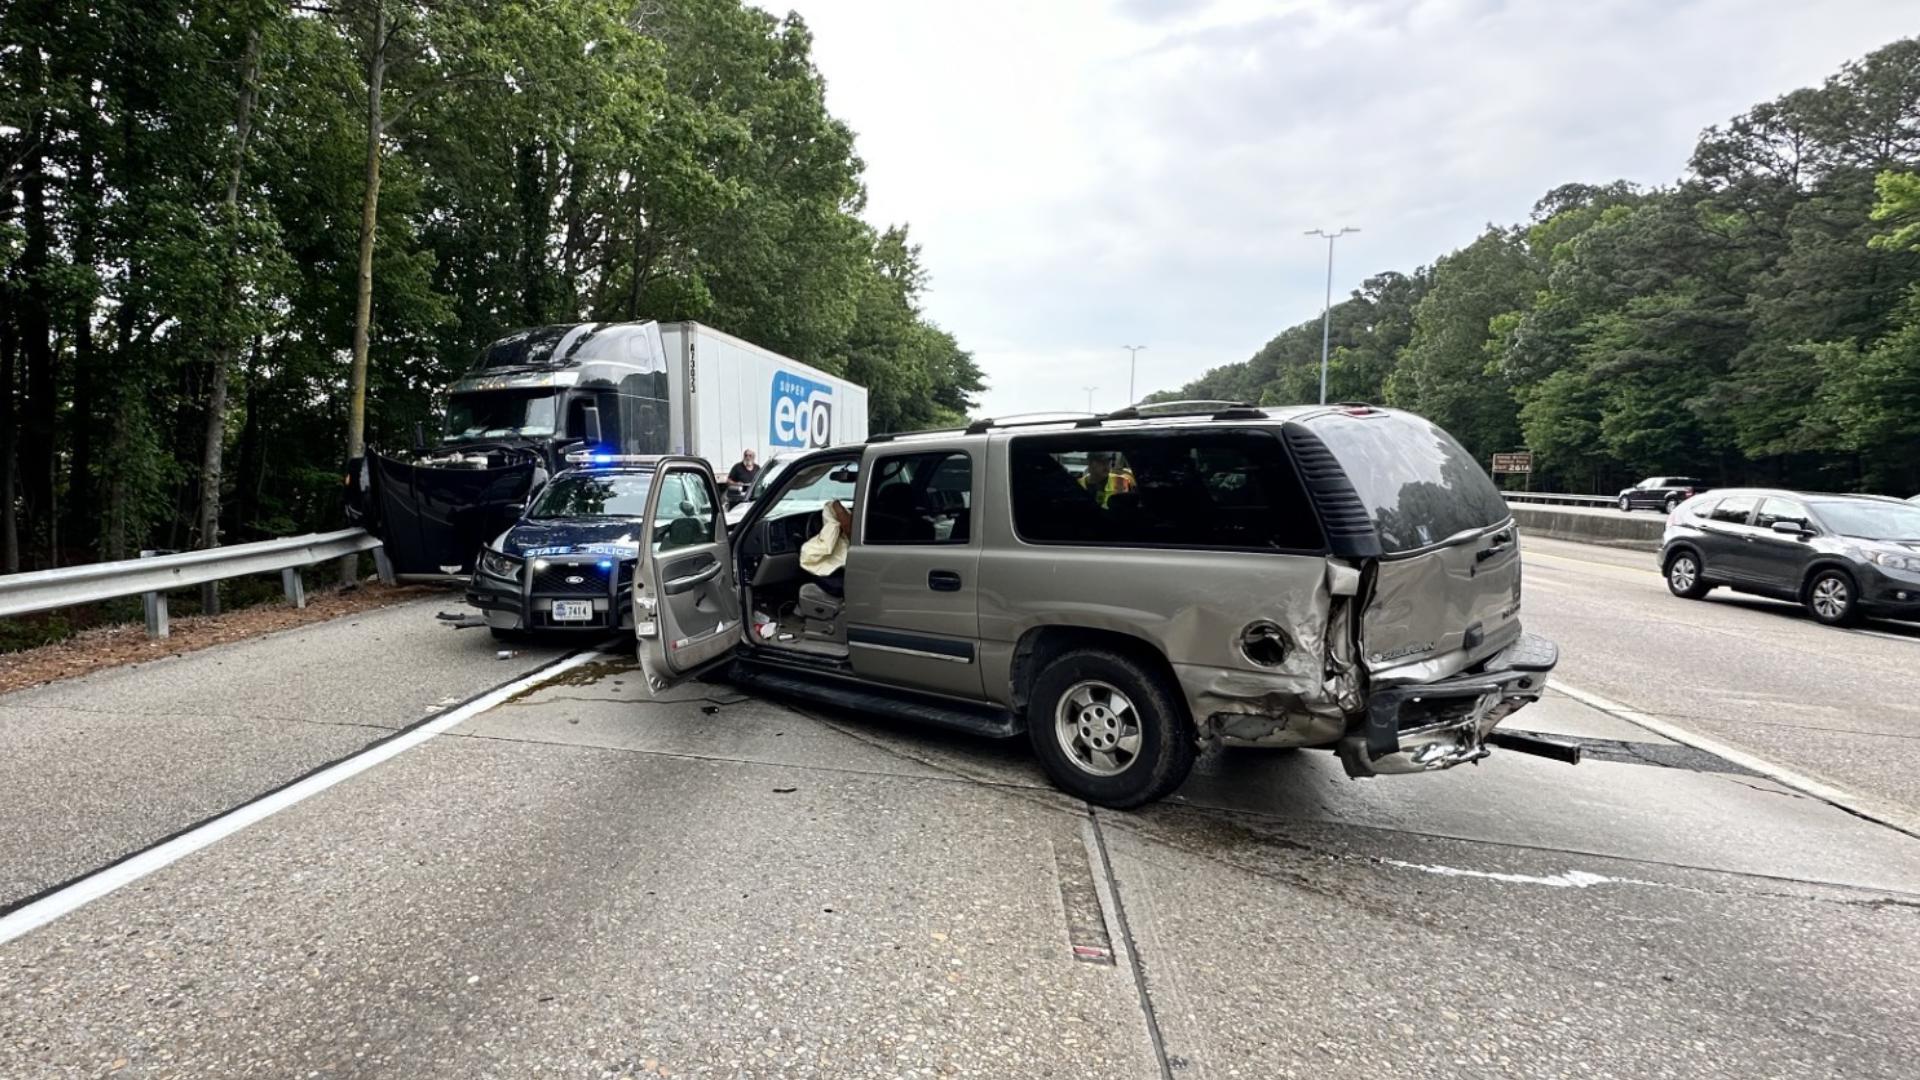 Three civilians and a state trooper were hurt in a four-car crash Friday morning on Interstate 64.